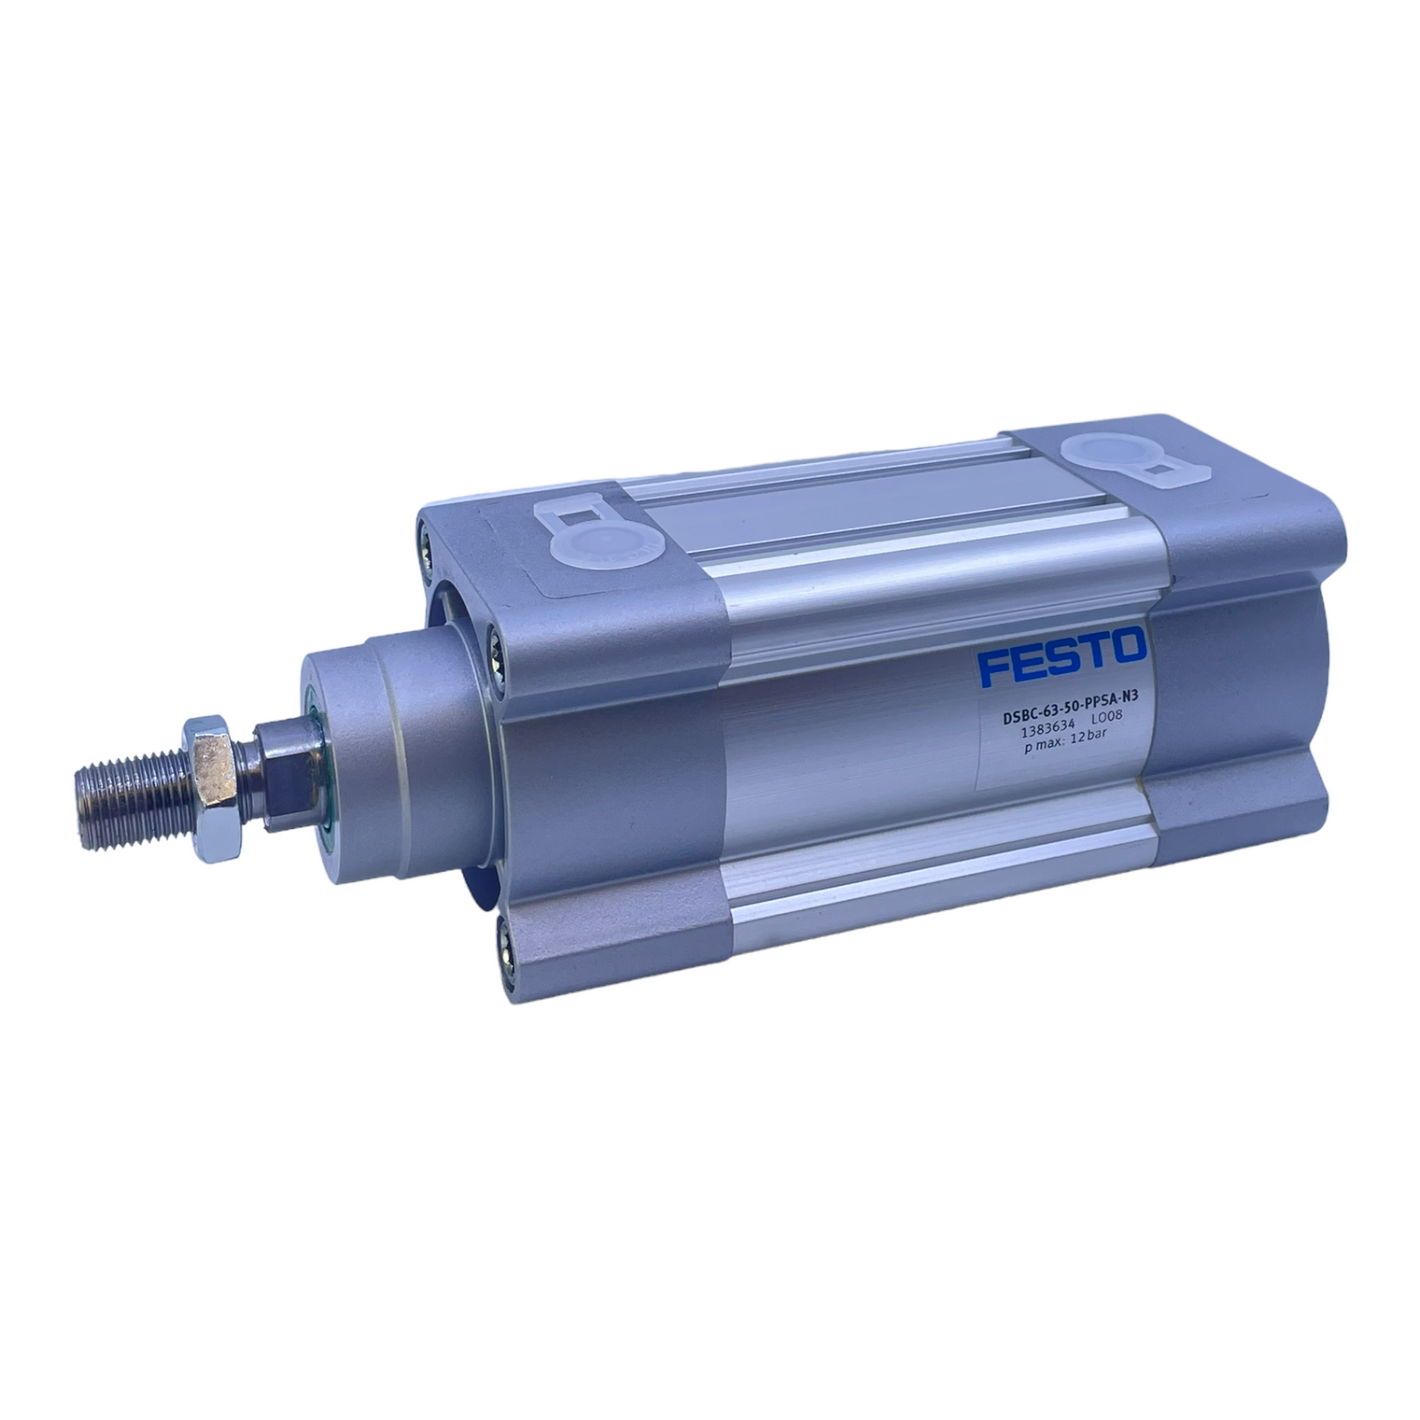 Festo DSBC-63-50-PPSA-N3 standard cylinder 1383634 0.4 to 12bar double-acting